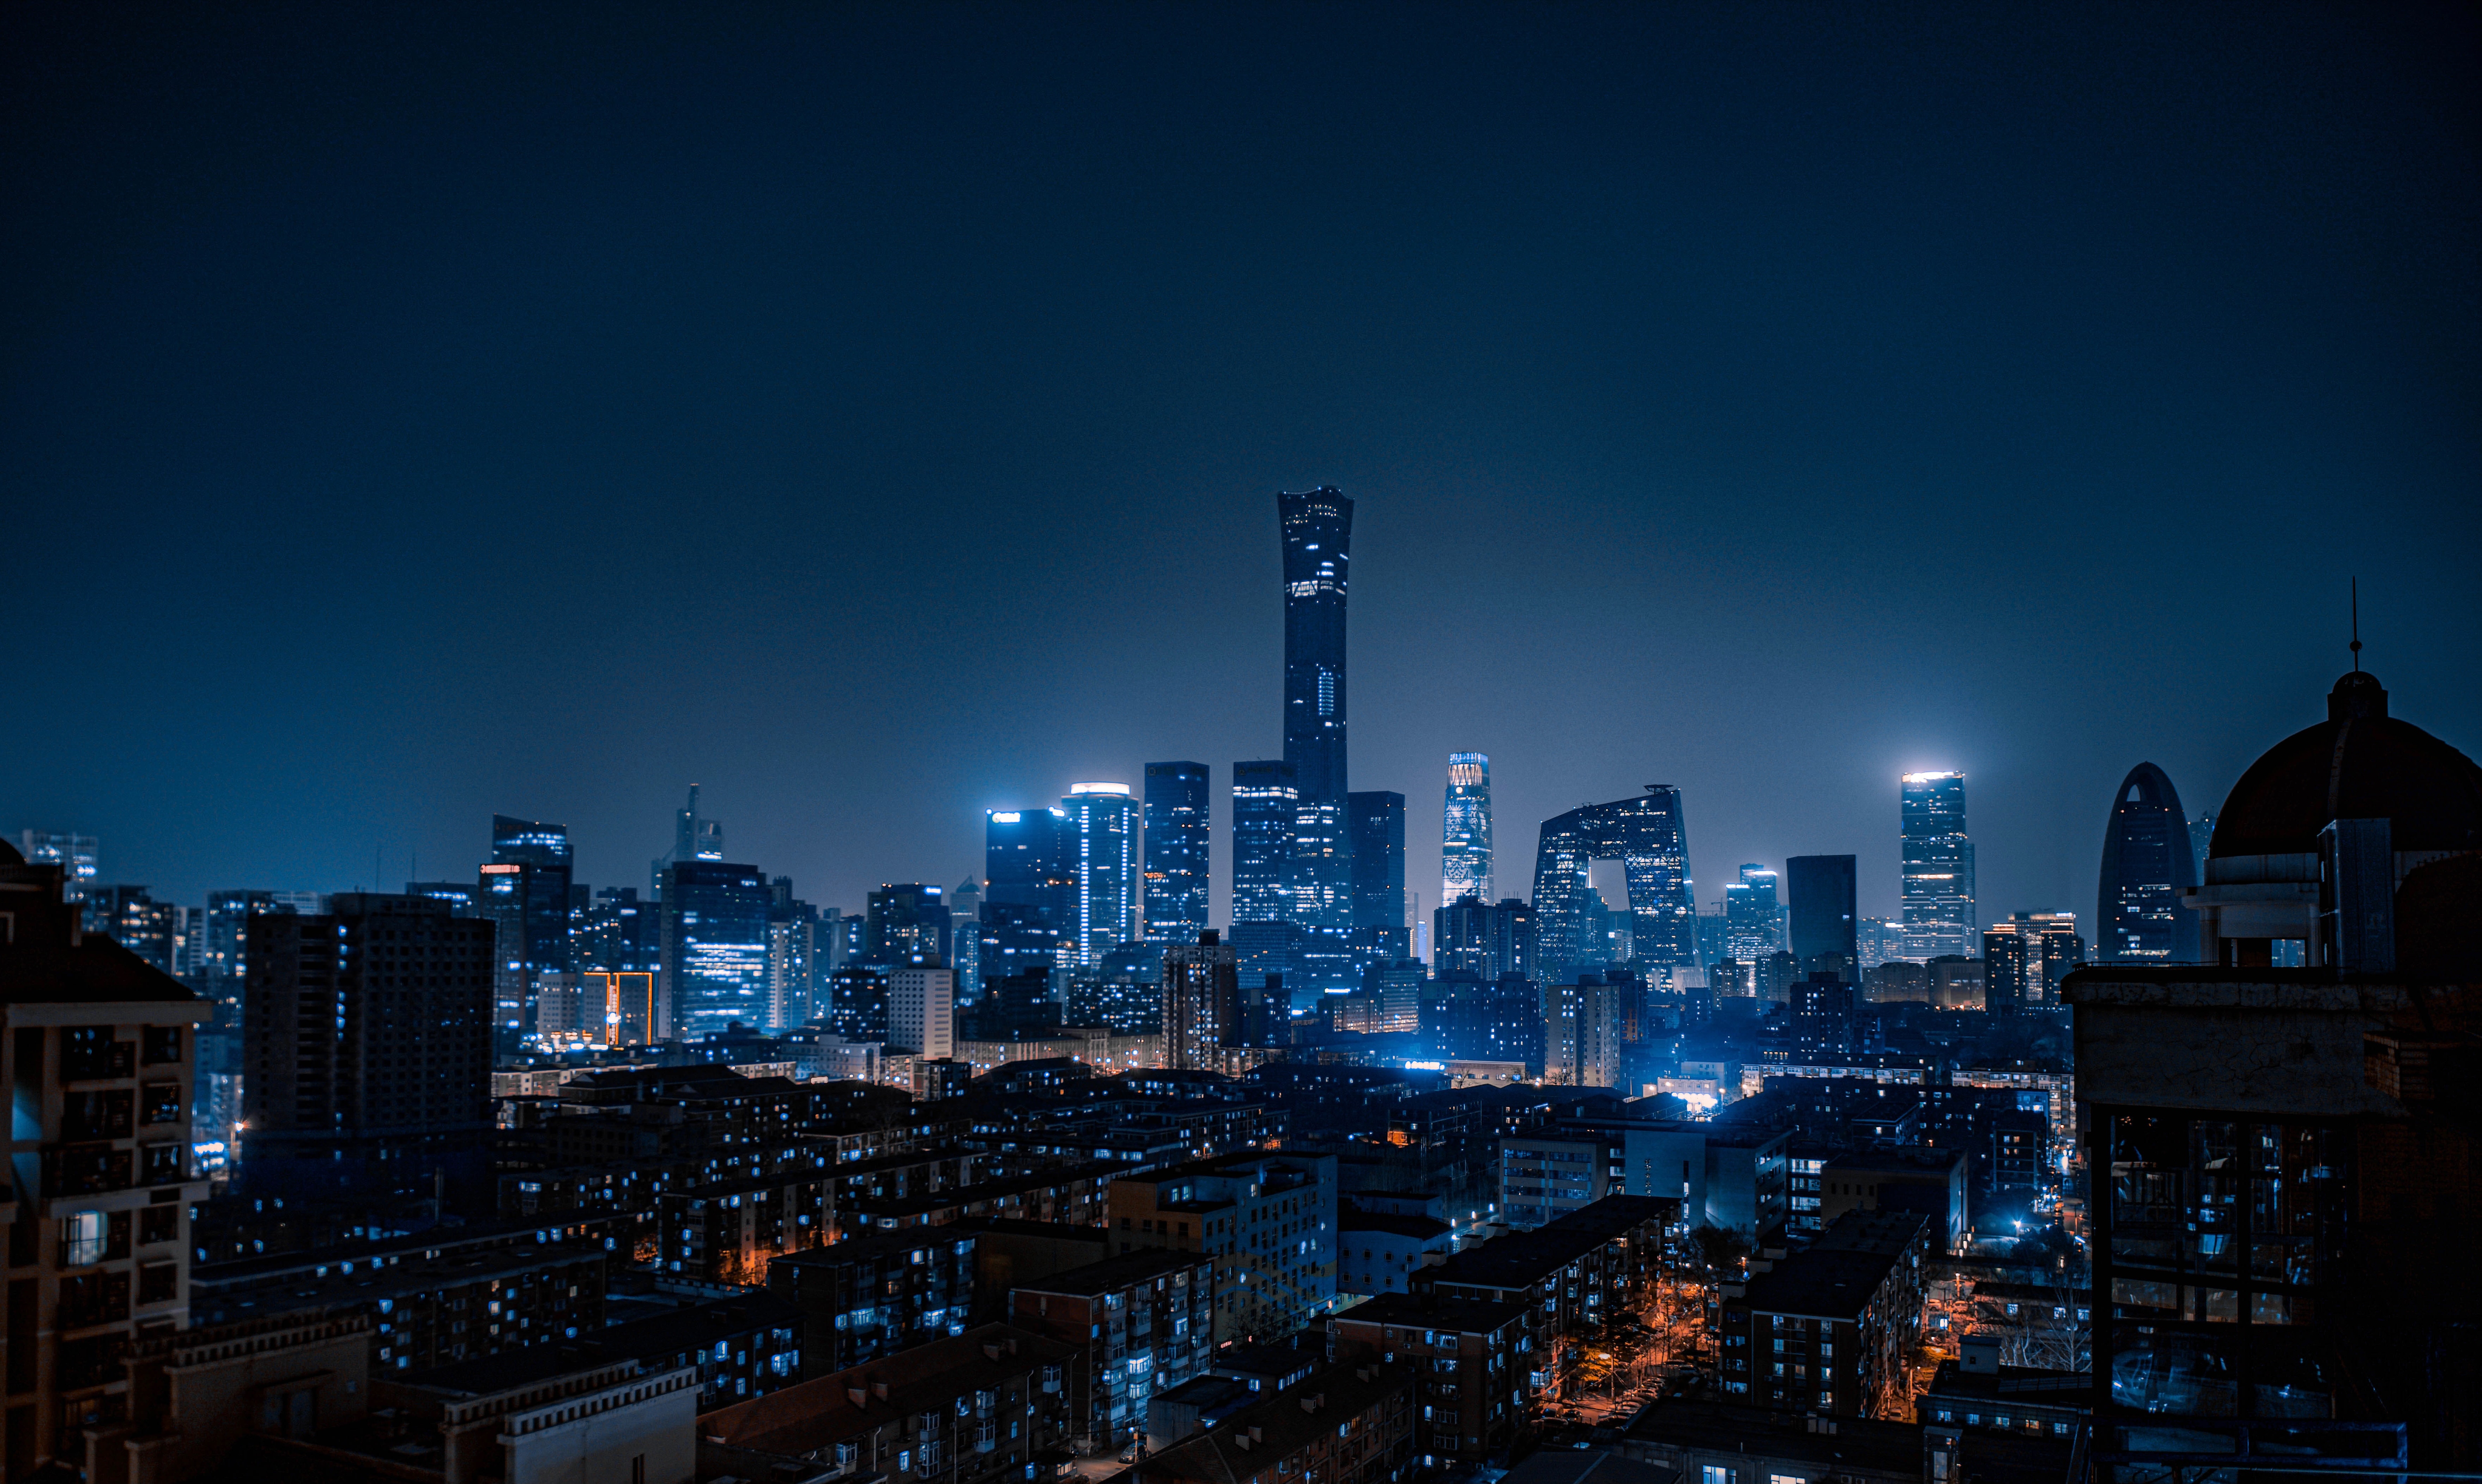 Wallpaper Full HD night, view from above, cities, city, building, lights, china, beijing